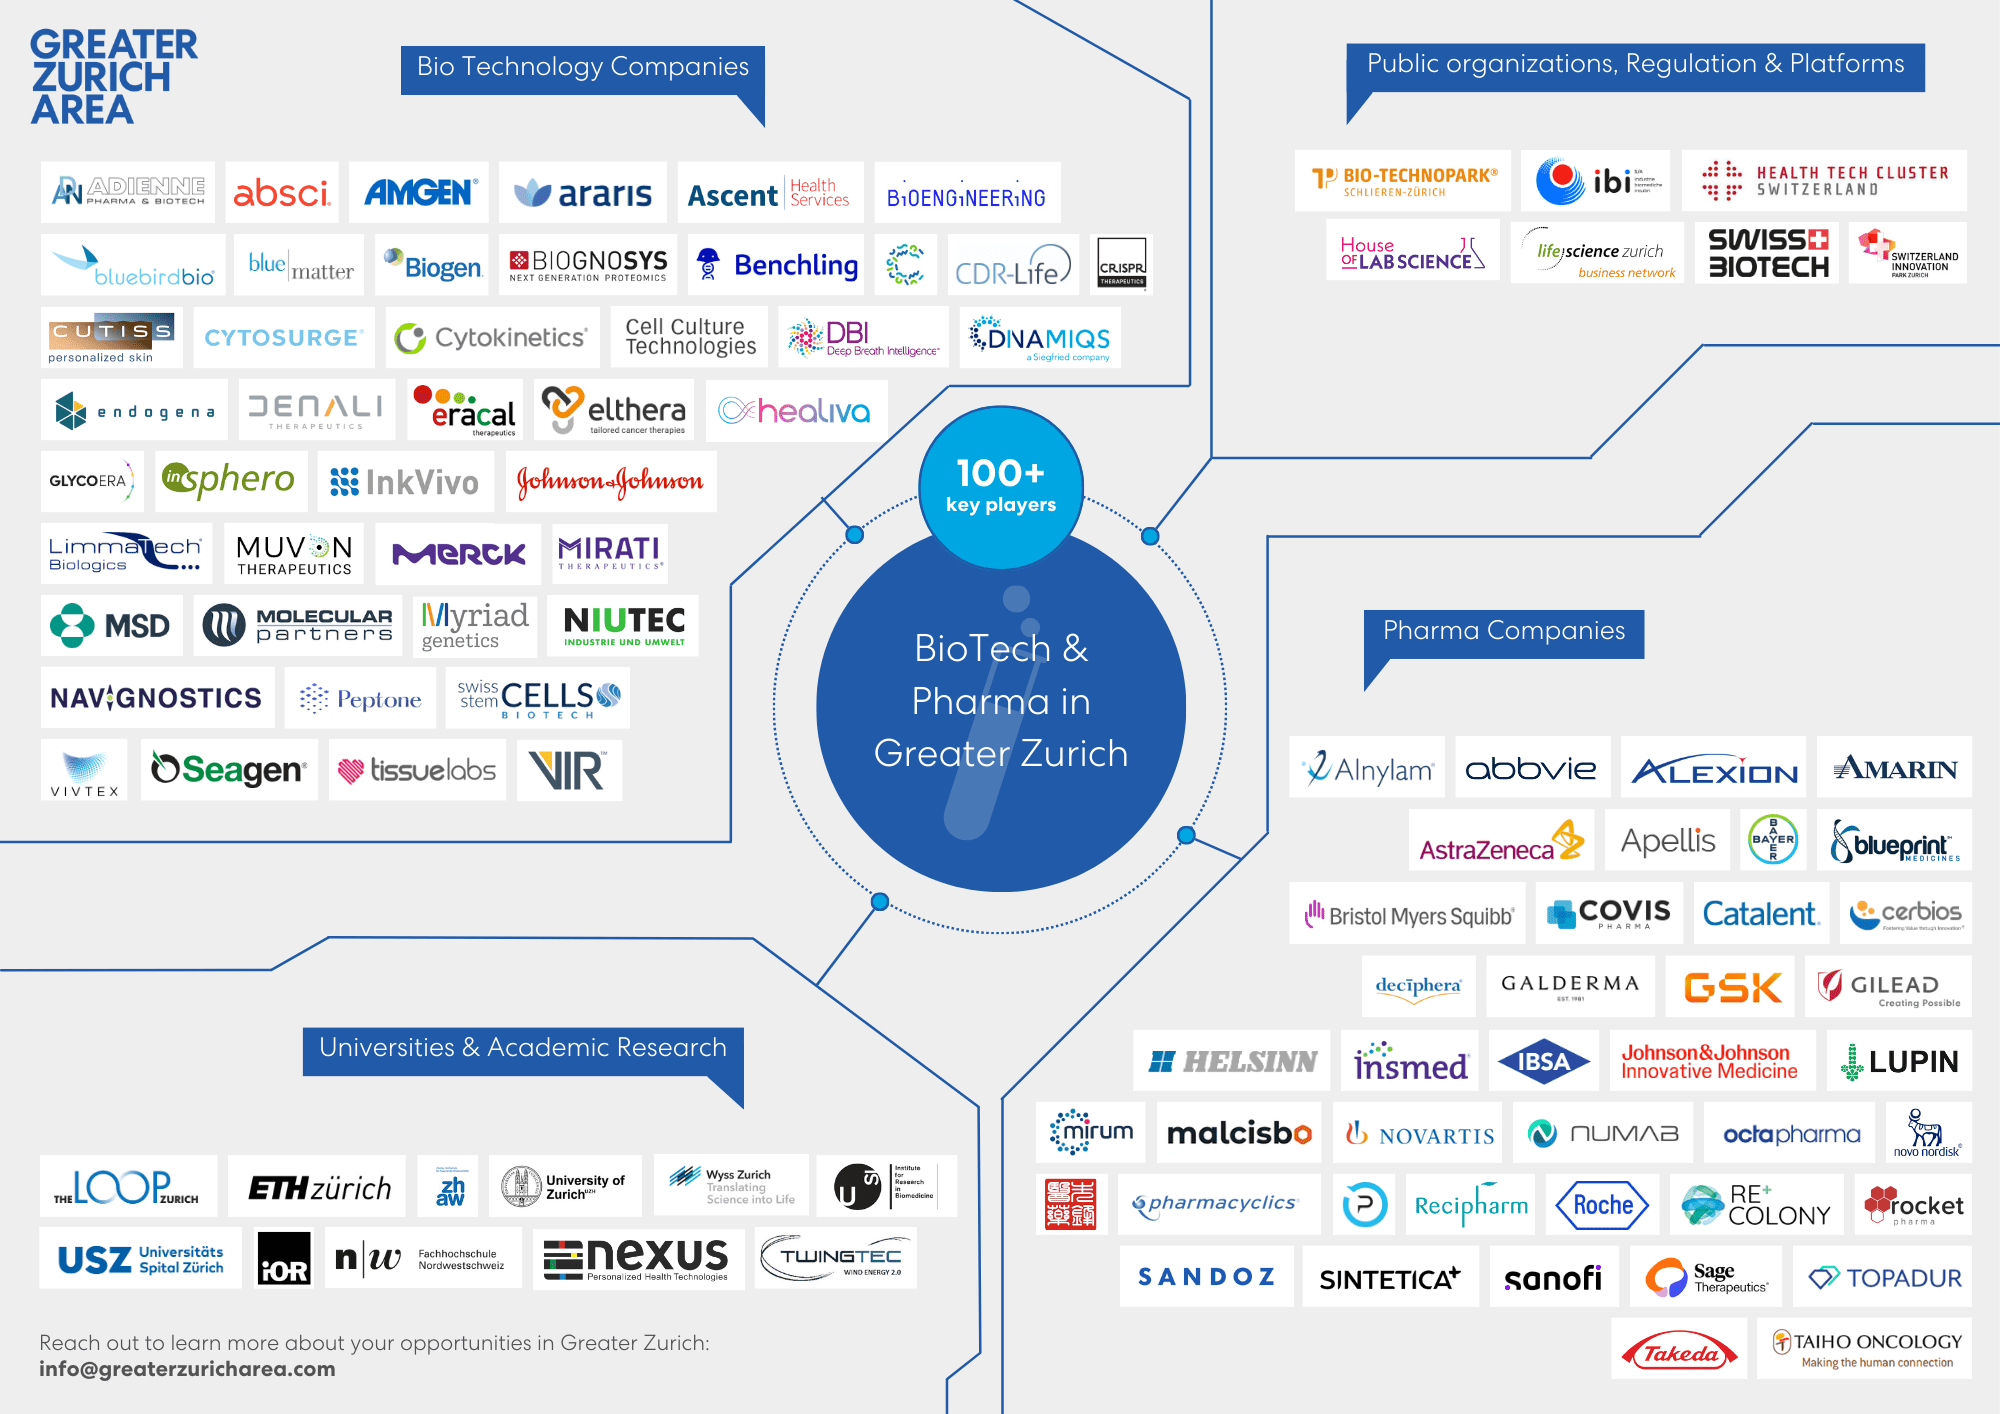 BioTech Pharma companies in Greater Zurich ecosystem Map